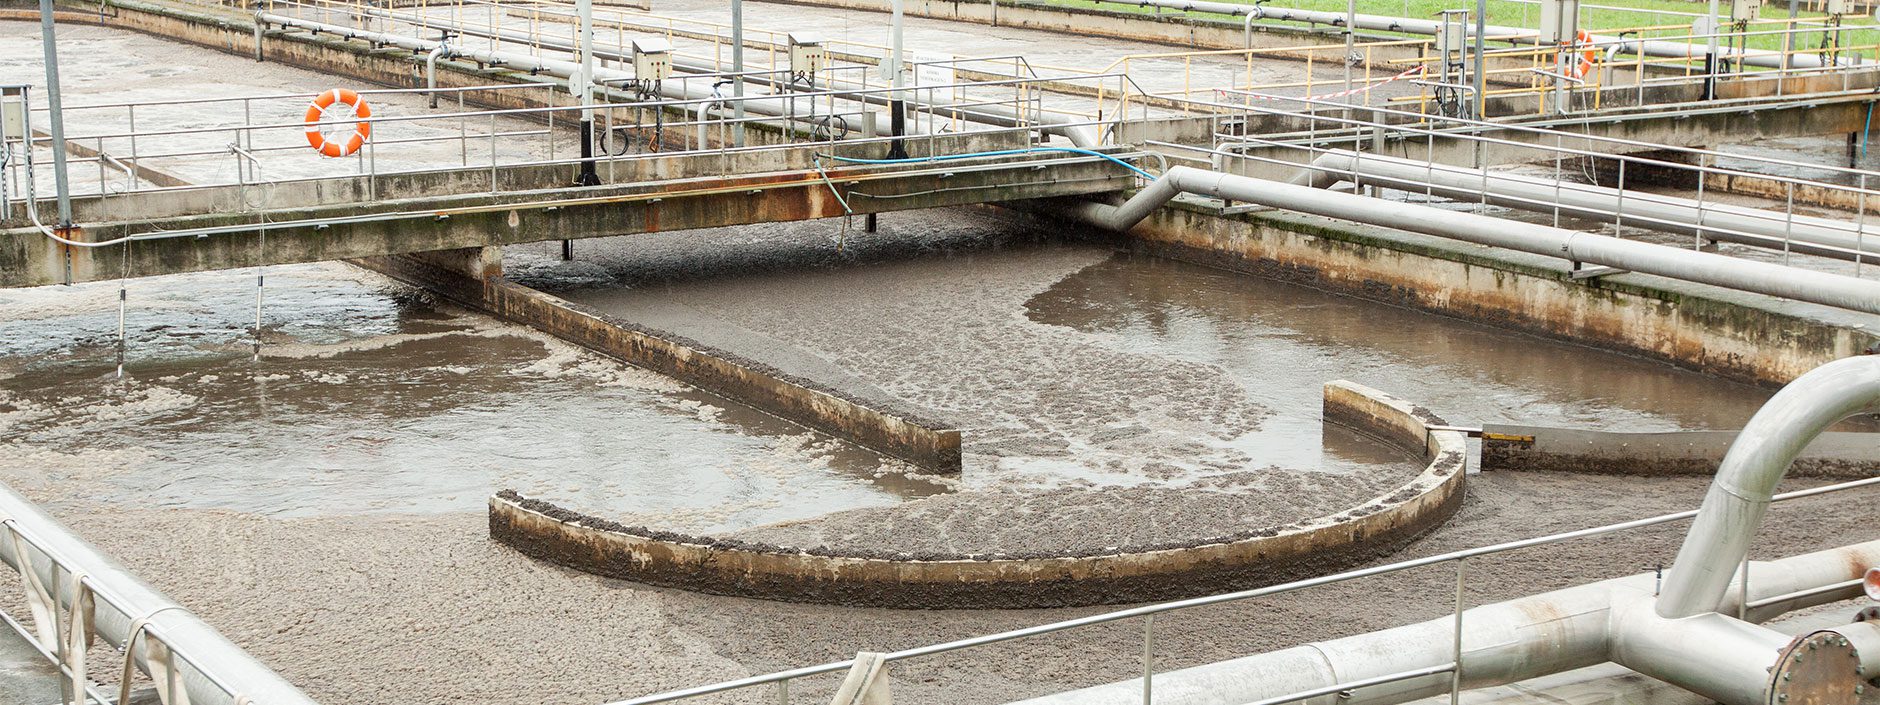 Wastewater treatment facility